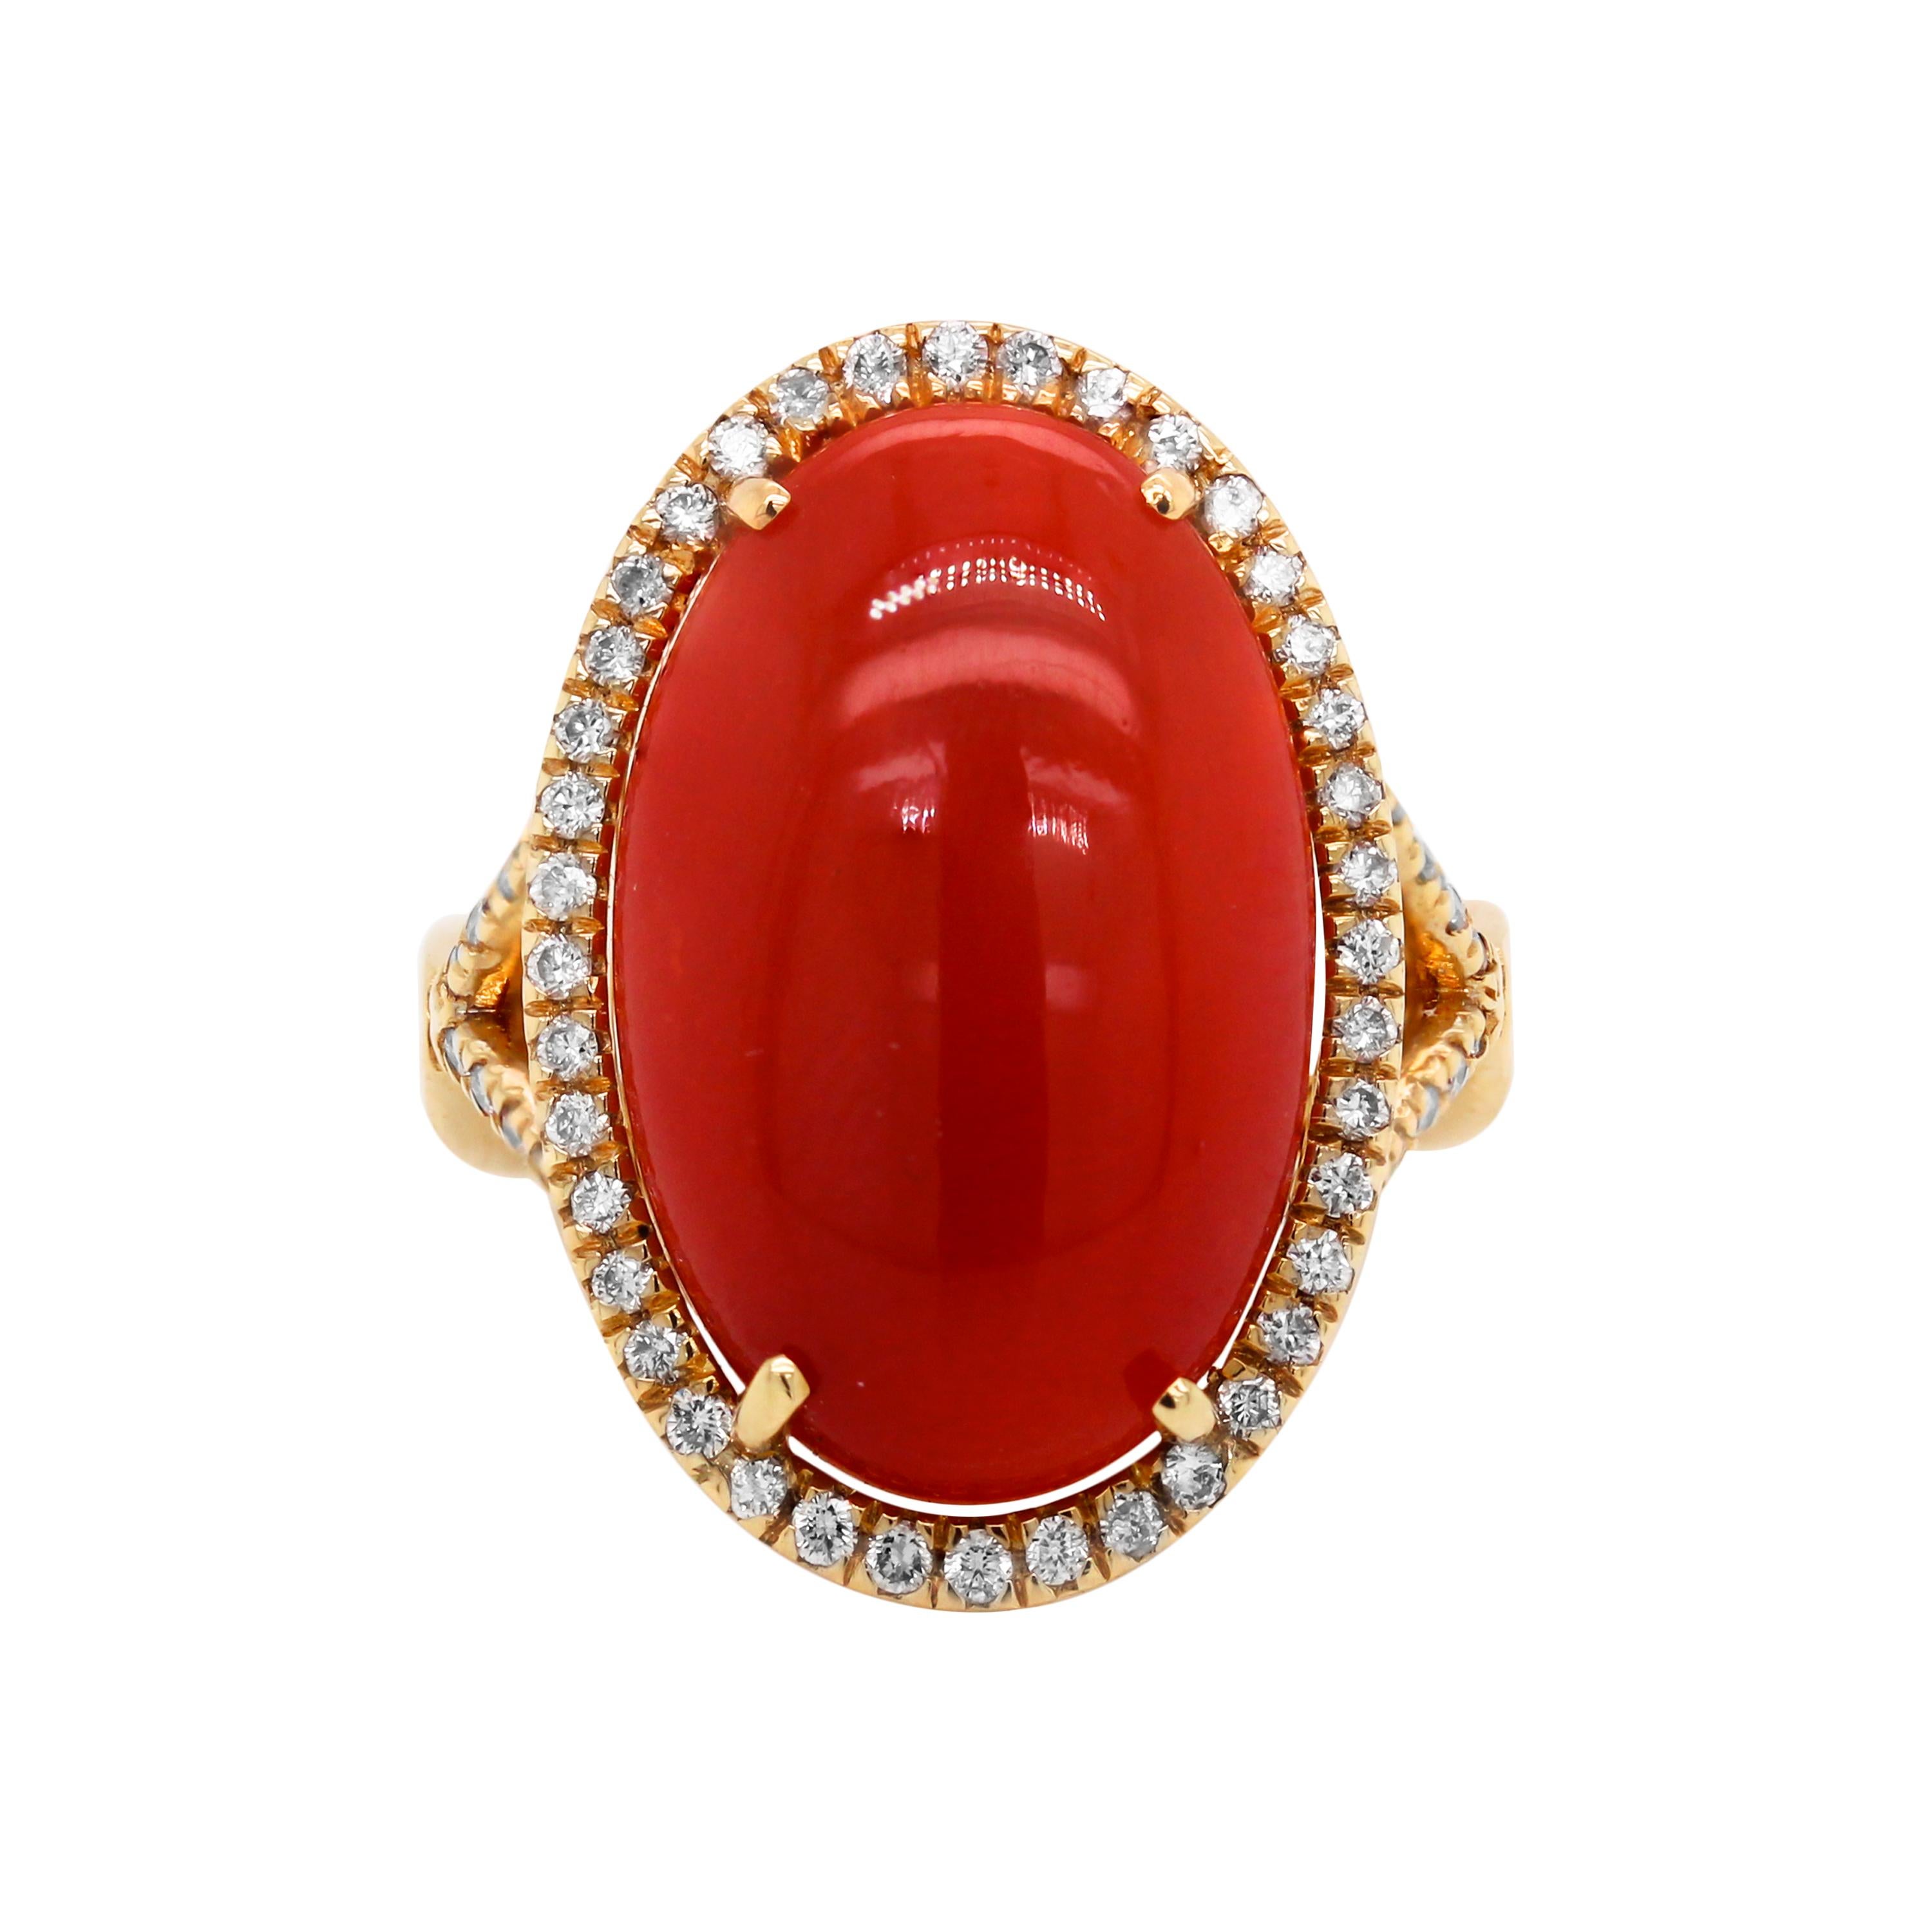 Oval Sardinian Coral 18K Yellow Gold Diamond Cocktail Ring

A beautiful Sardinian coral center is set in the center surrounding with diamonds that lead to the band of the ring.

12.53 carat Sardinian coral center
0.70 carat H color, SI clarity